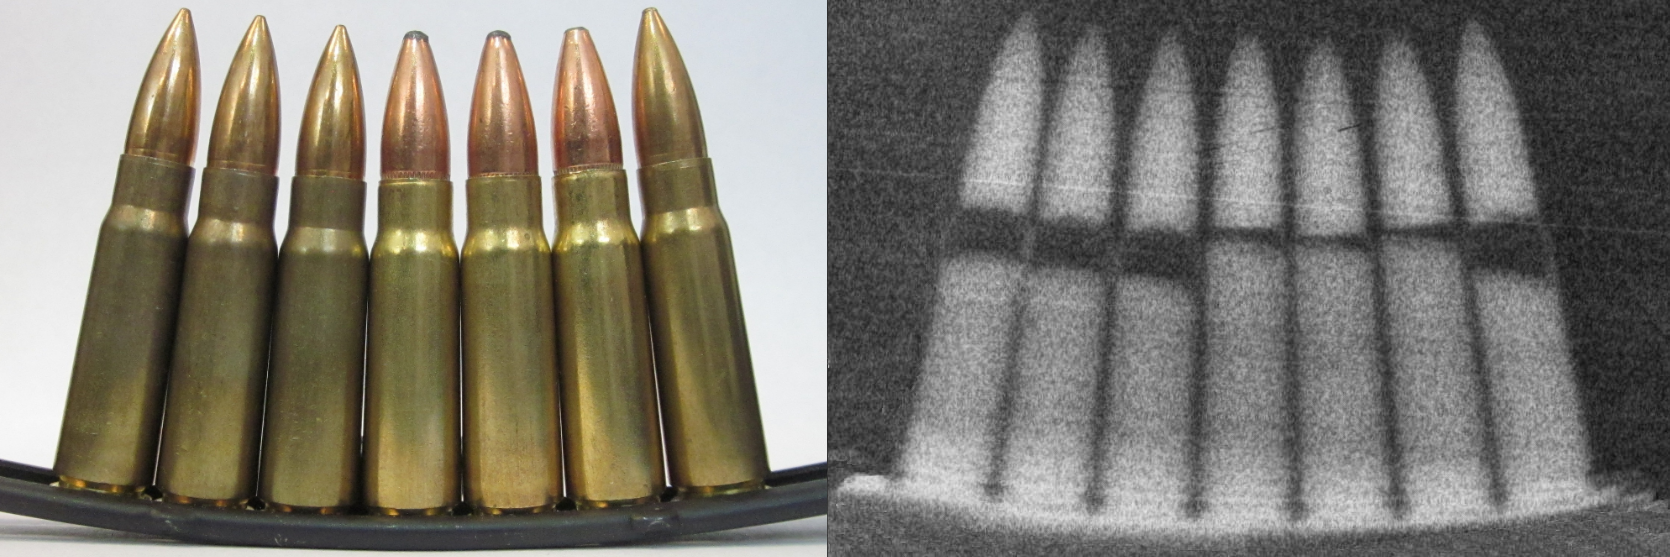 Photo and Pictoris nuetron radiograph of various bullets